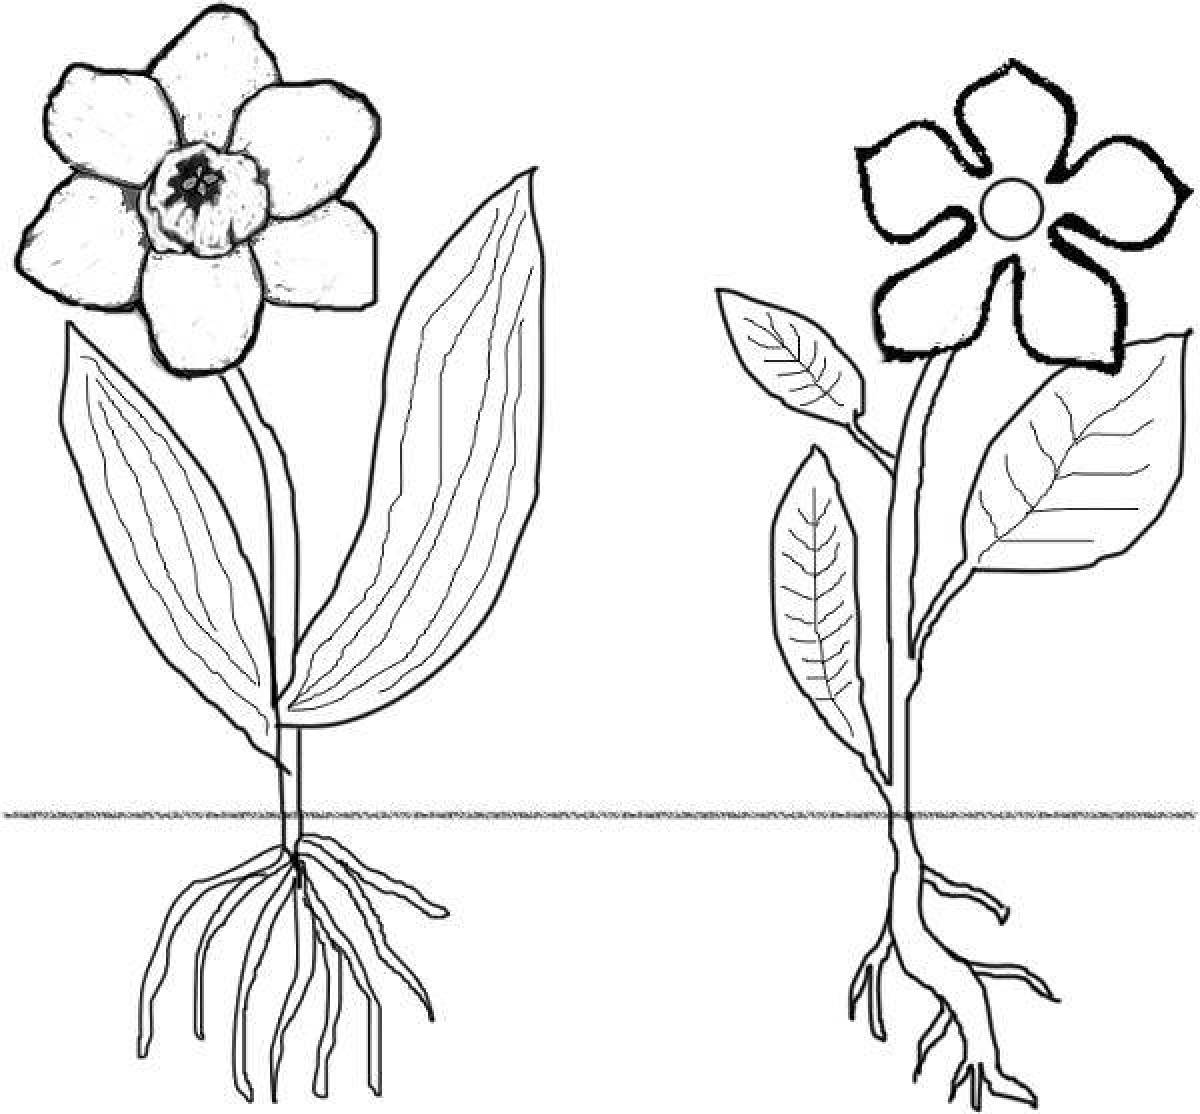 Coloring page of fascinating plant parts